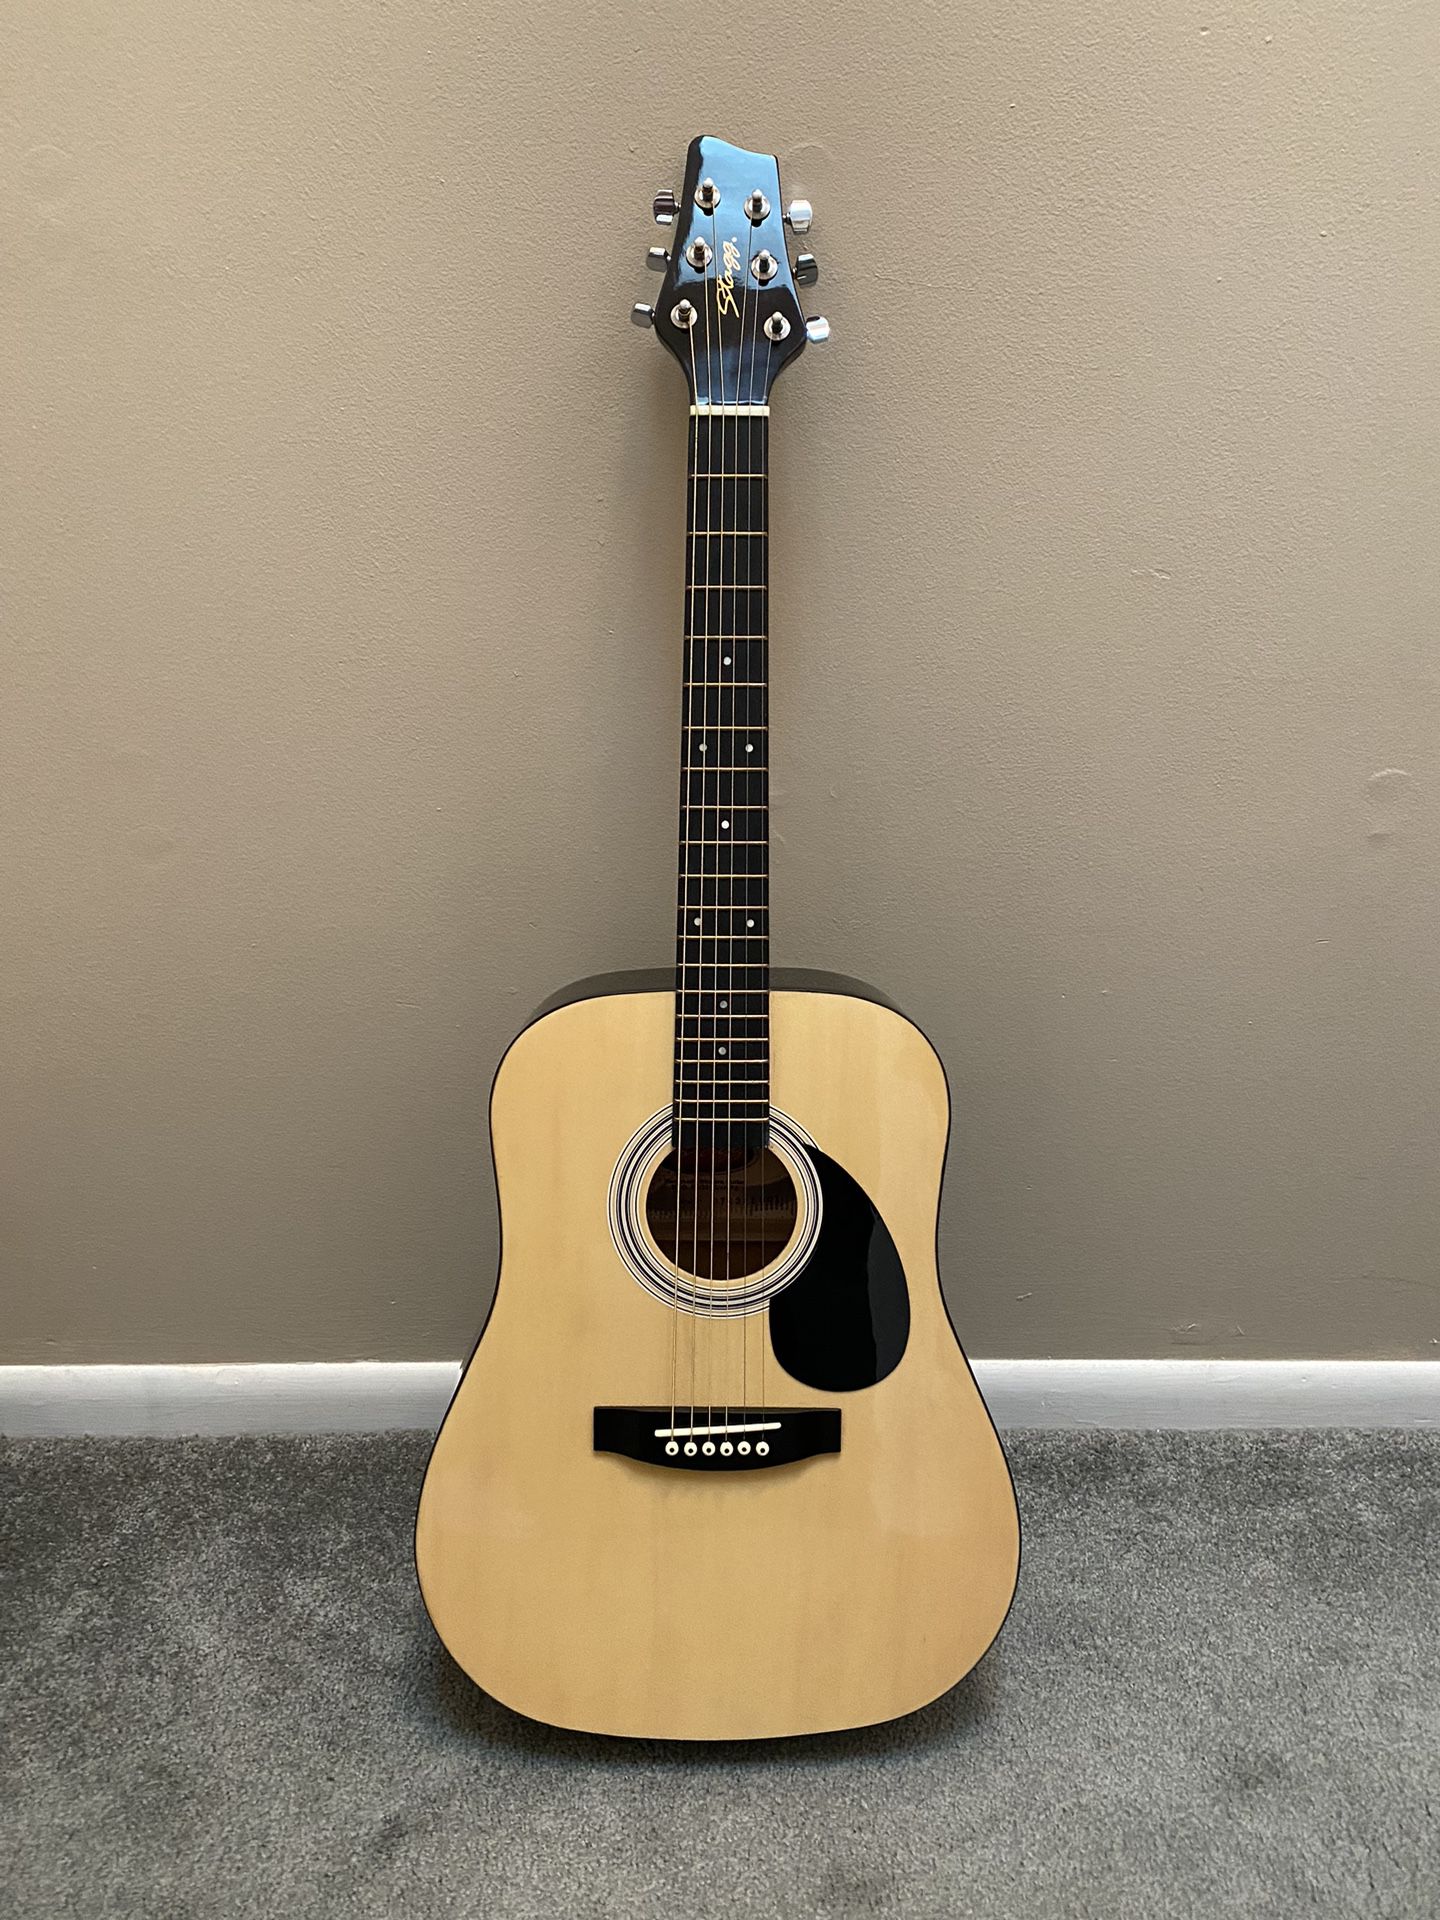 Stagg Acoustic Guitar 